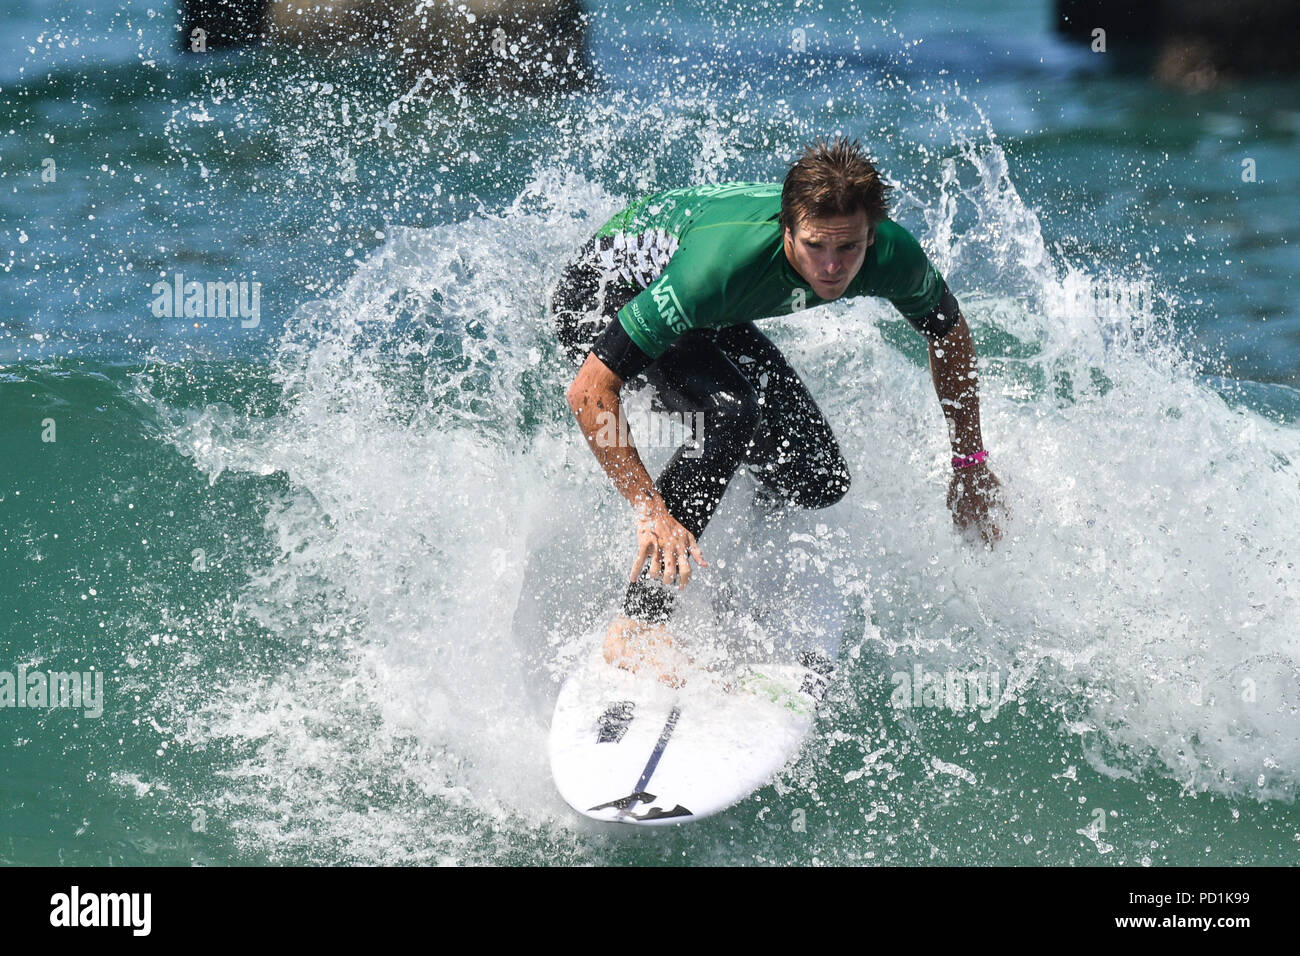 Huntington Beach, California, USA. 2nd Aug, 2018. RYAN CALLINAN, from Australia, competes in the third round of the Vans US Open held at Huntington Beach, California. Credit: Amy Sanderson/ZUMA Wire/Alamy Live News Stock Photo